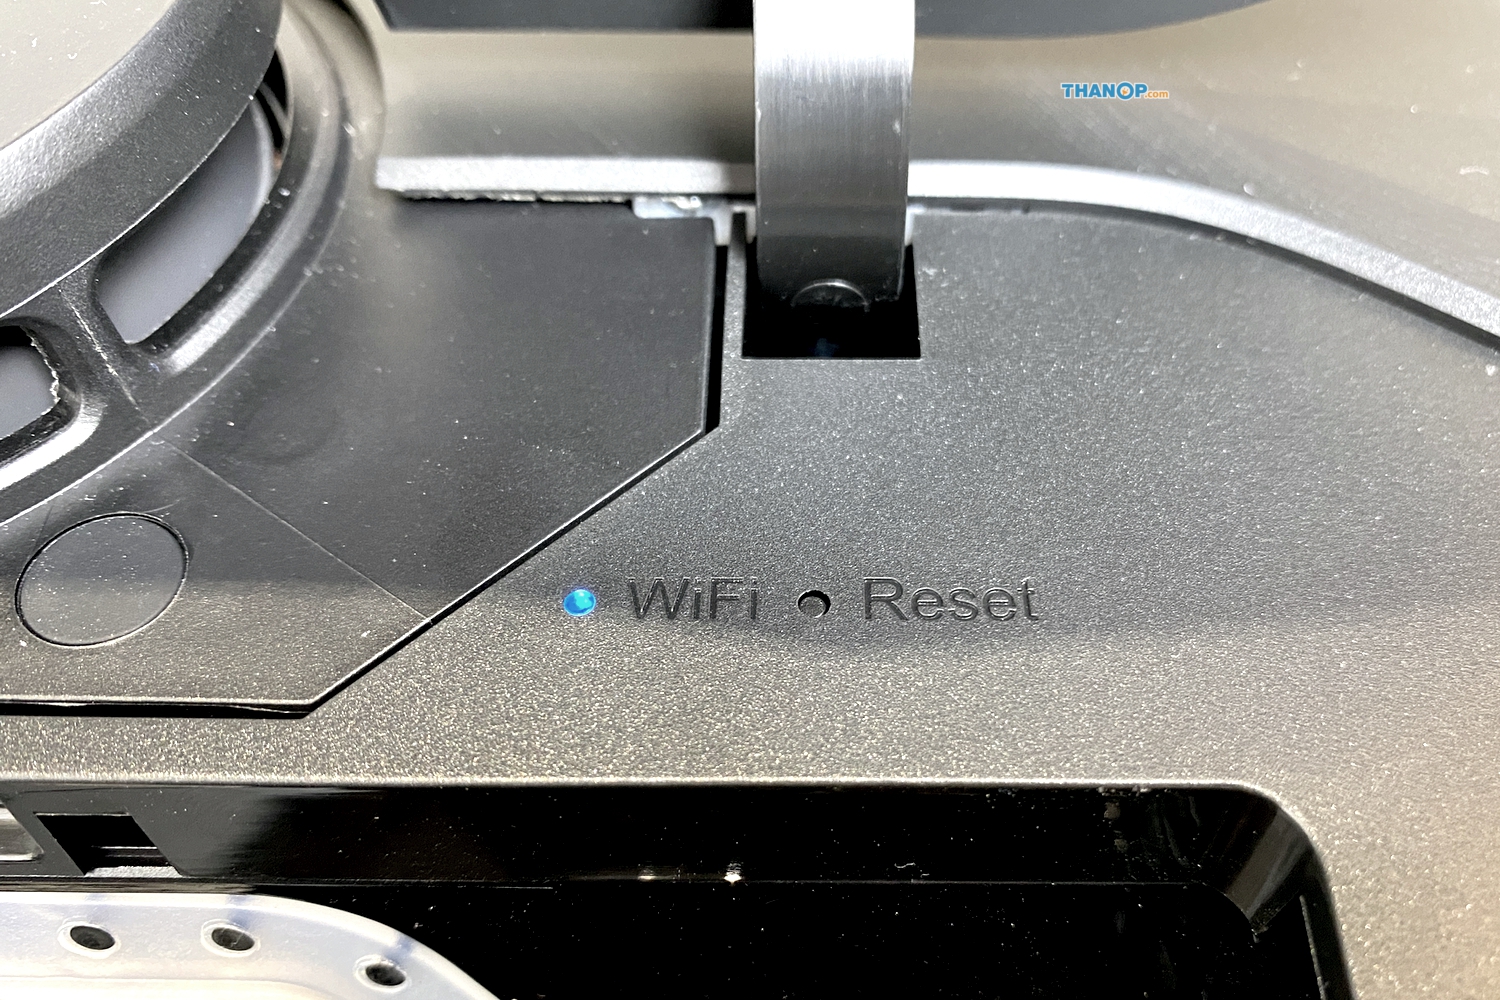 roborock-s7-maxv-ultra-wifi-indicator-and-reset-button